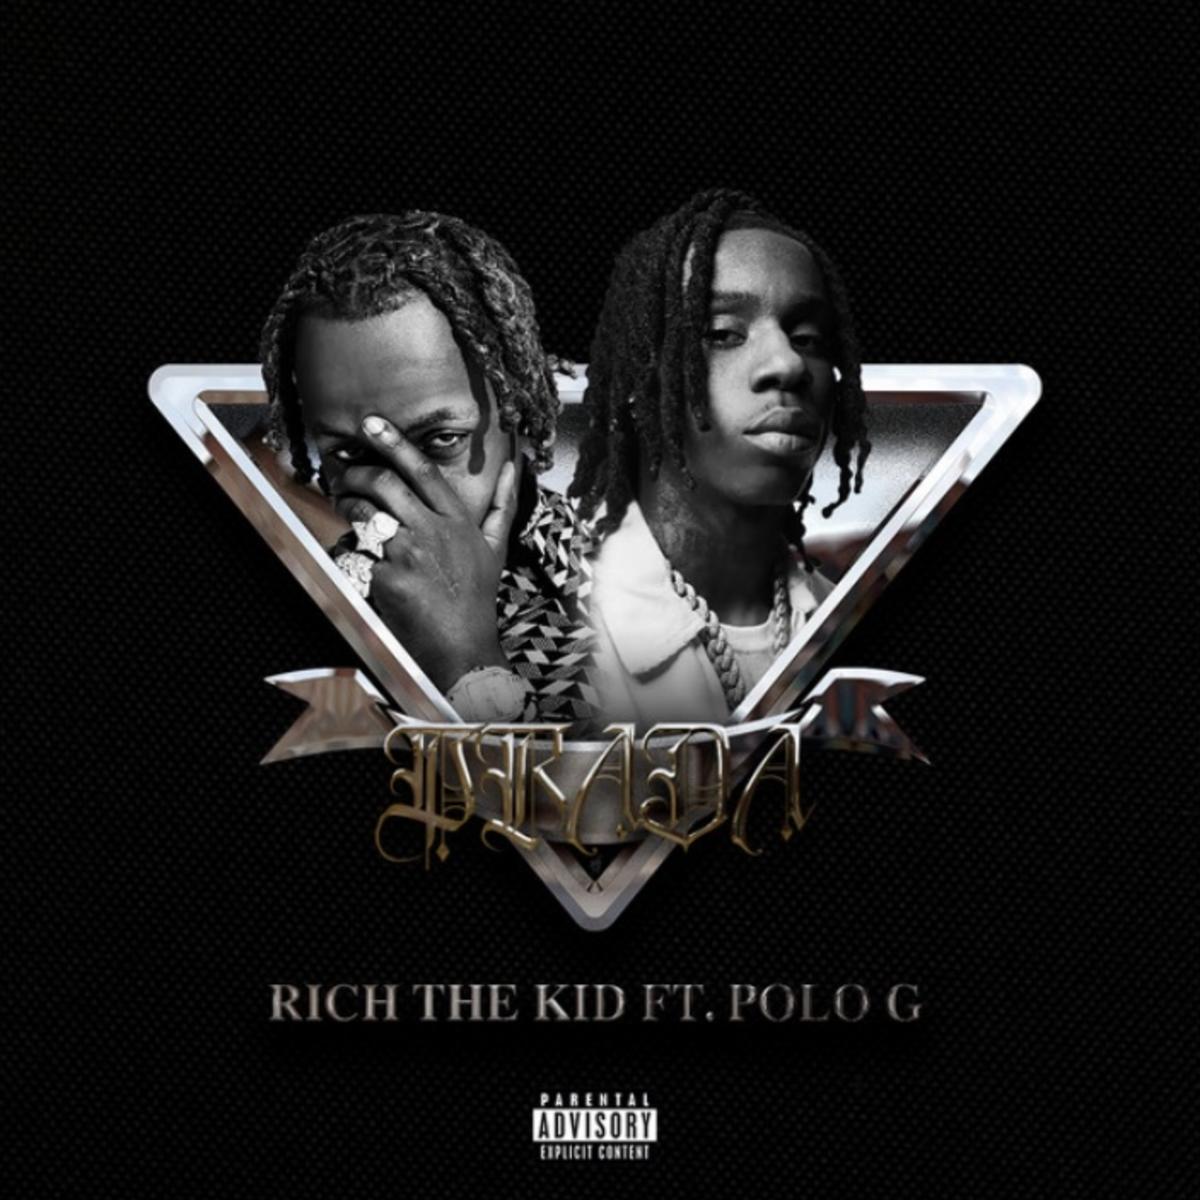 Rich The Kid Adds Polo G To “Prada”